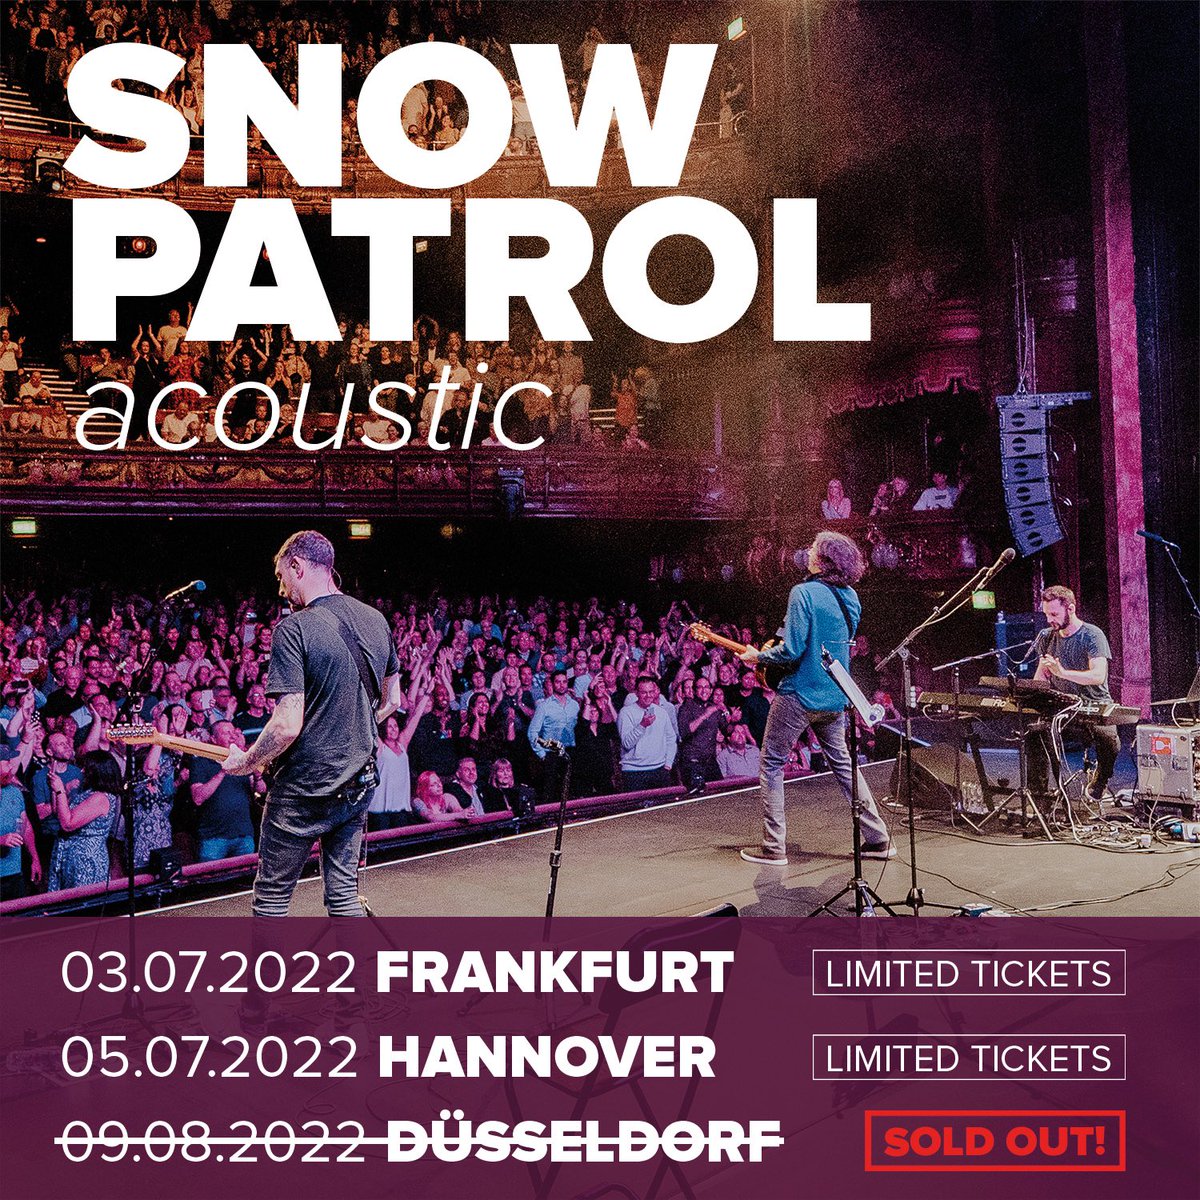 Our acoustic show in Düsseldorf is now sold out, thank you so much! Looking forward to seeing you there… SPx   There are limited tickets left for Frankfurt and Hannover Get your tickets here: snowpatrol.com/shows/